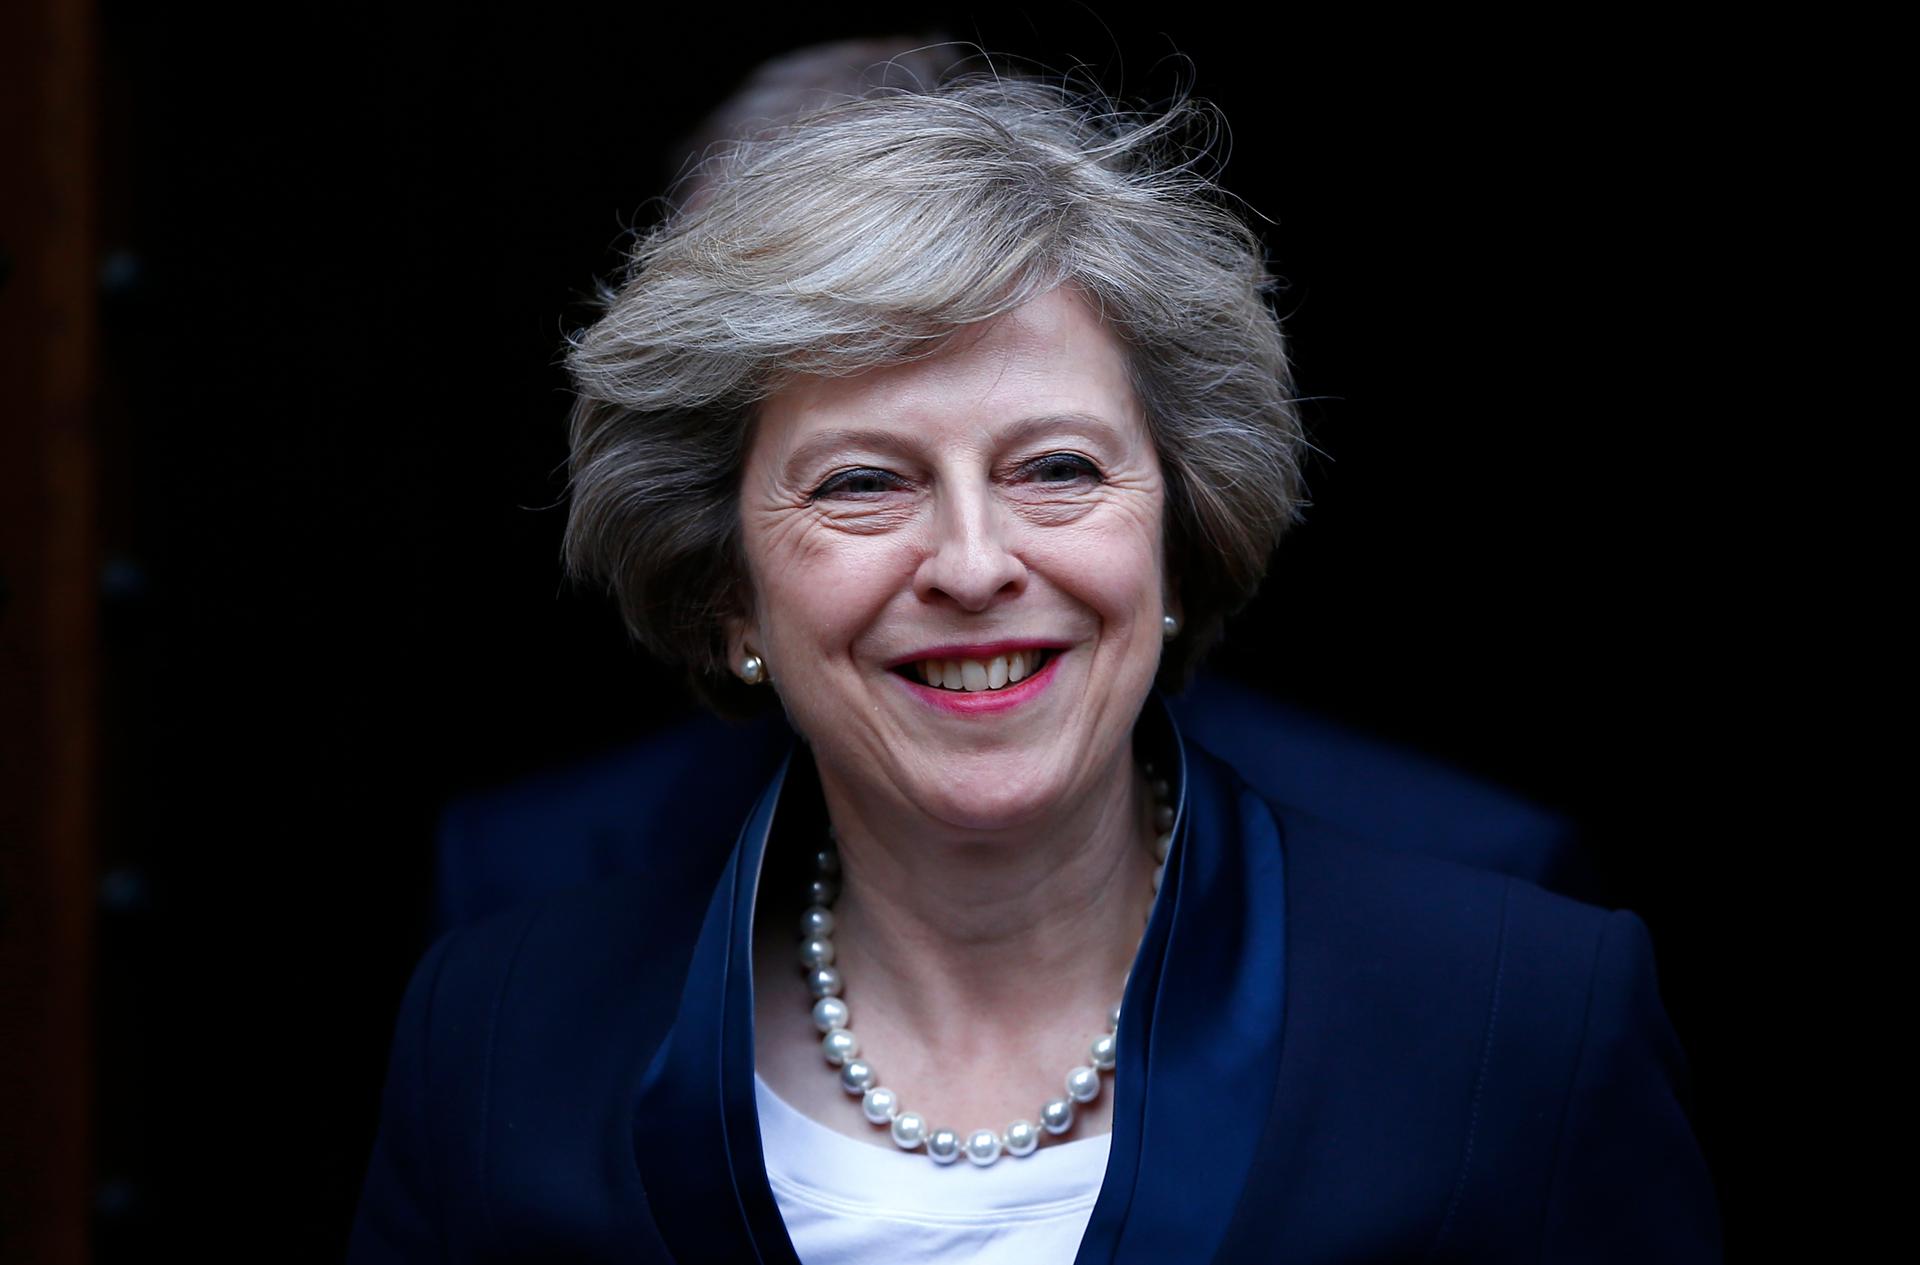 Britain's new Prime Minister Theresa May